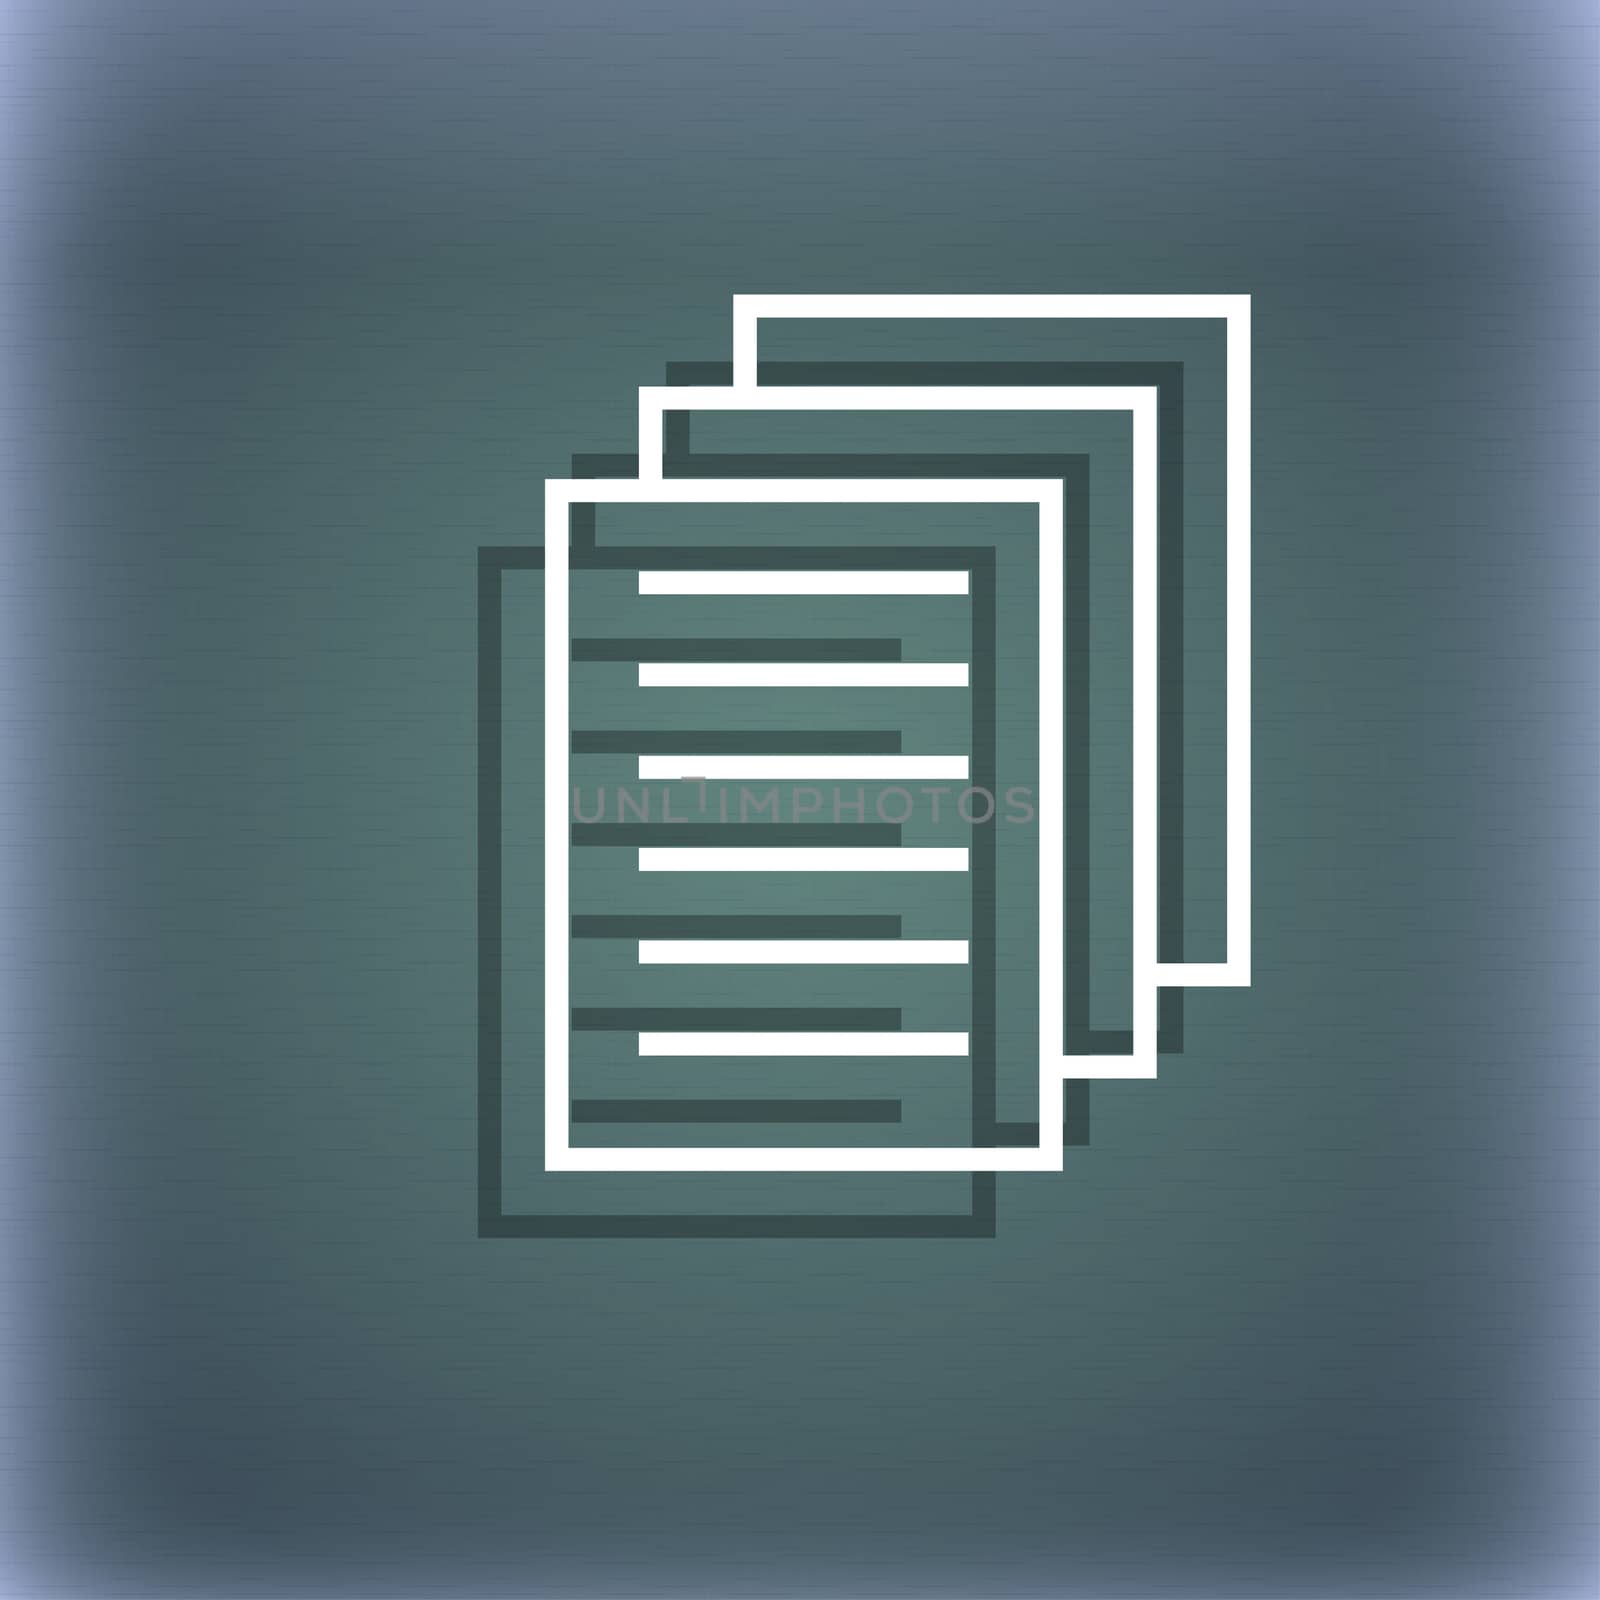 Copy file sign icon. Duplicate document symbol. On the blue-green abstract background with shadow and space for your text.  by serhii_lohvyniuk